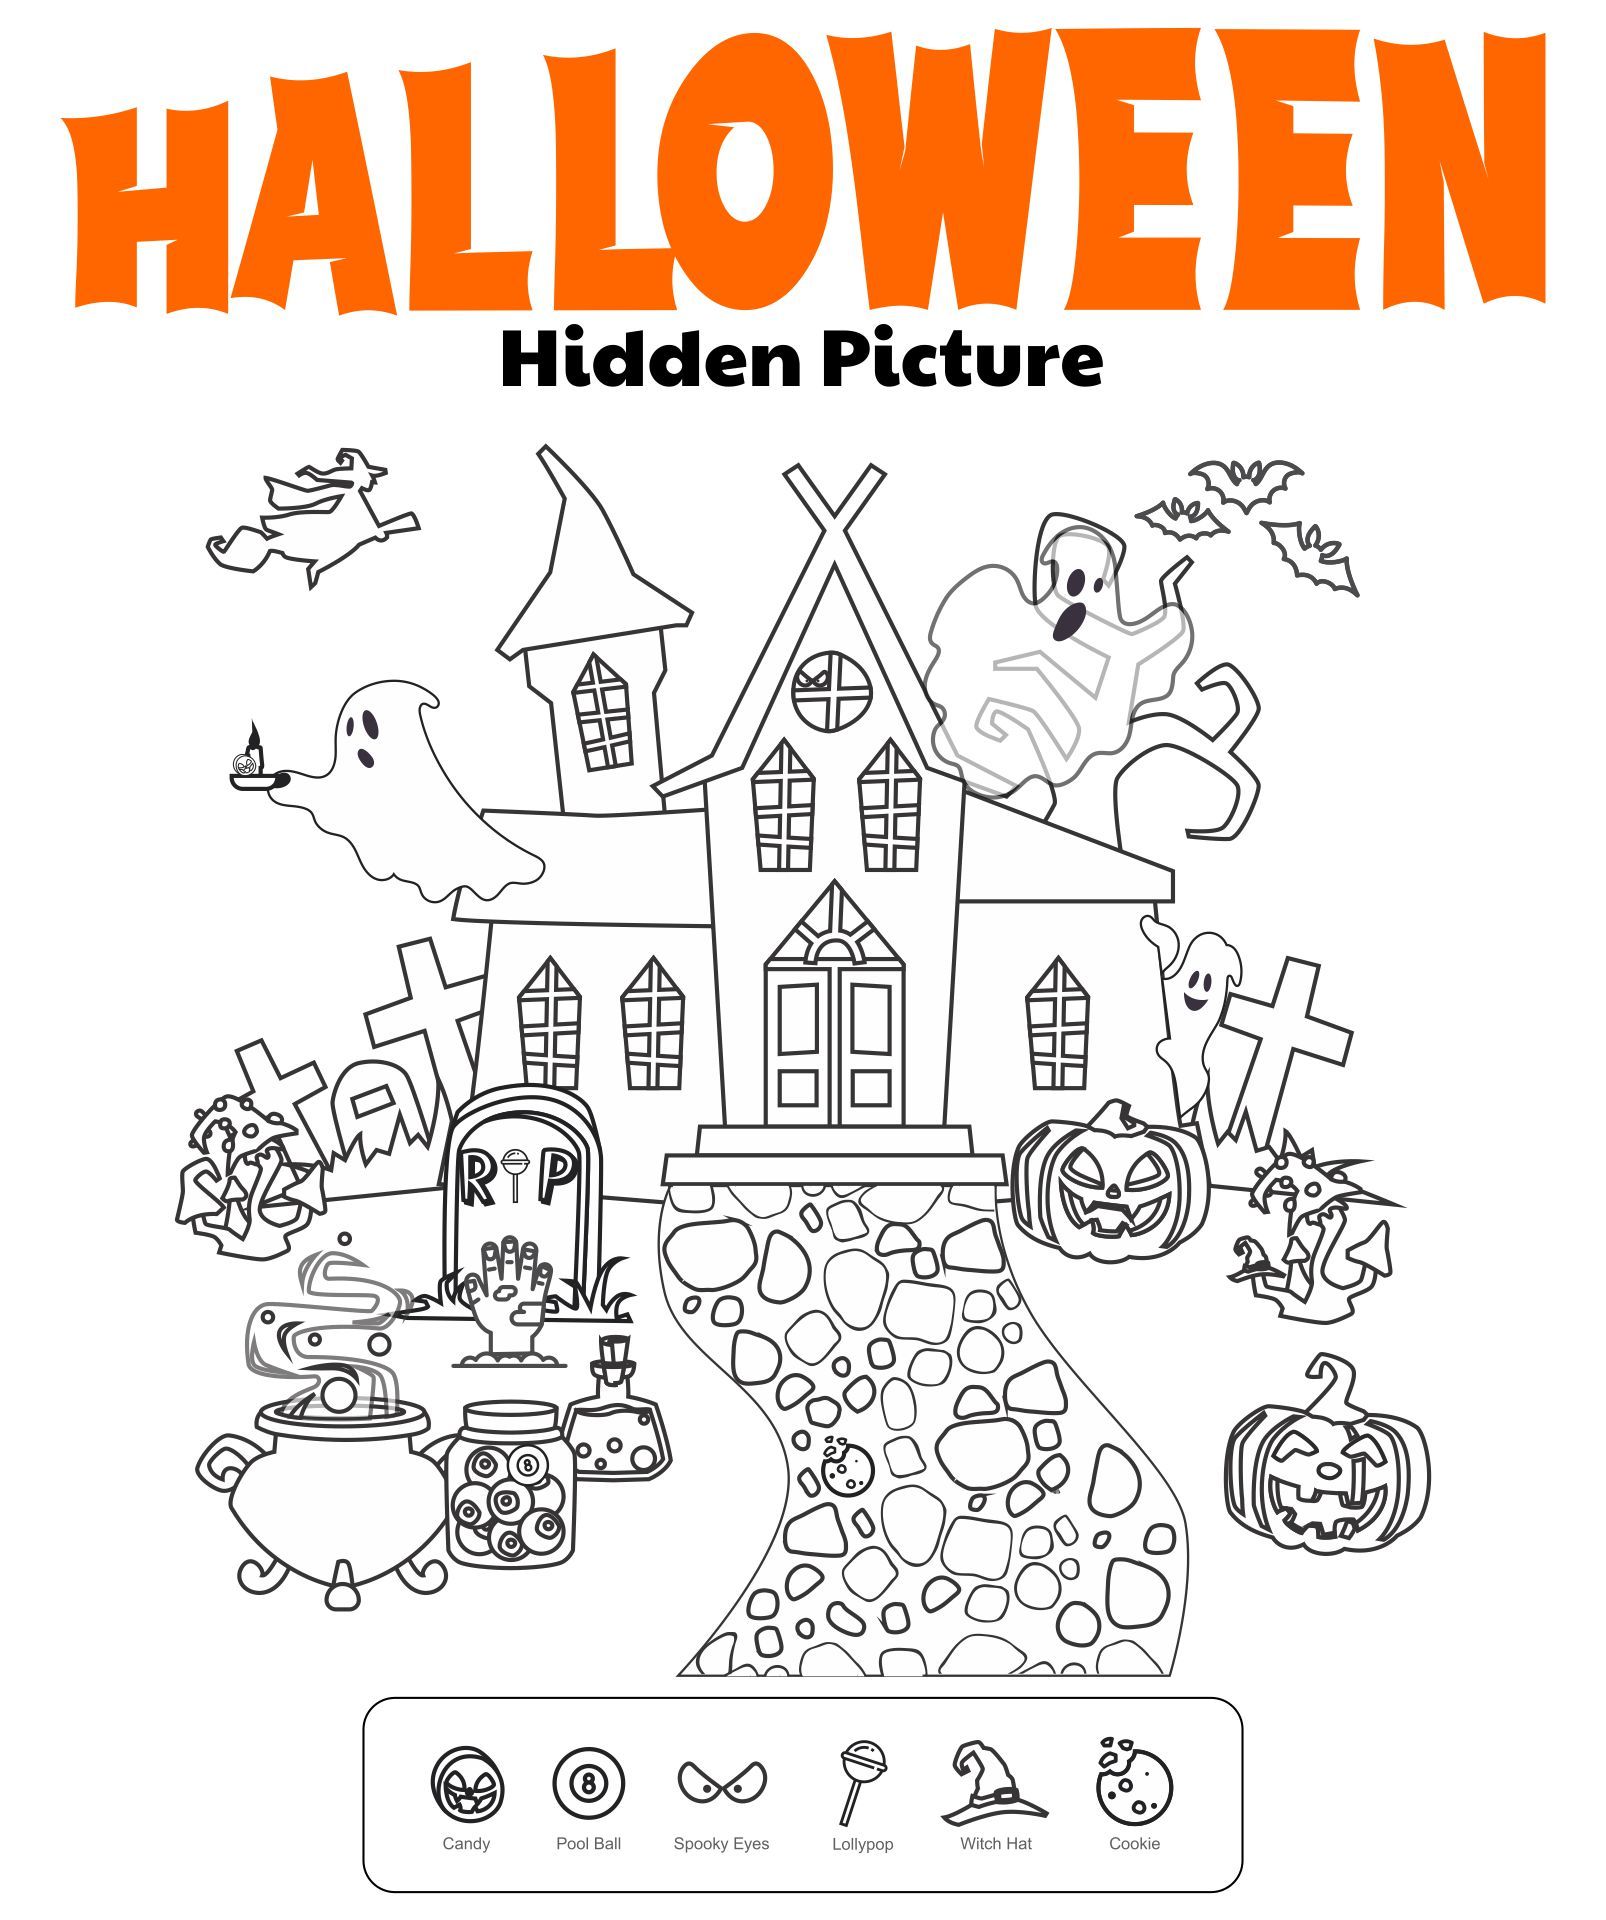 Best halloween hidden picture printable pdf for free at printablee hidden pictures spooky eyes halloween party themes